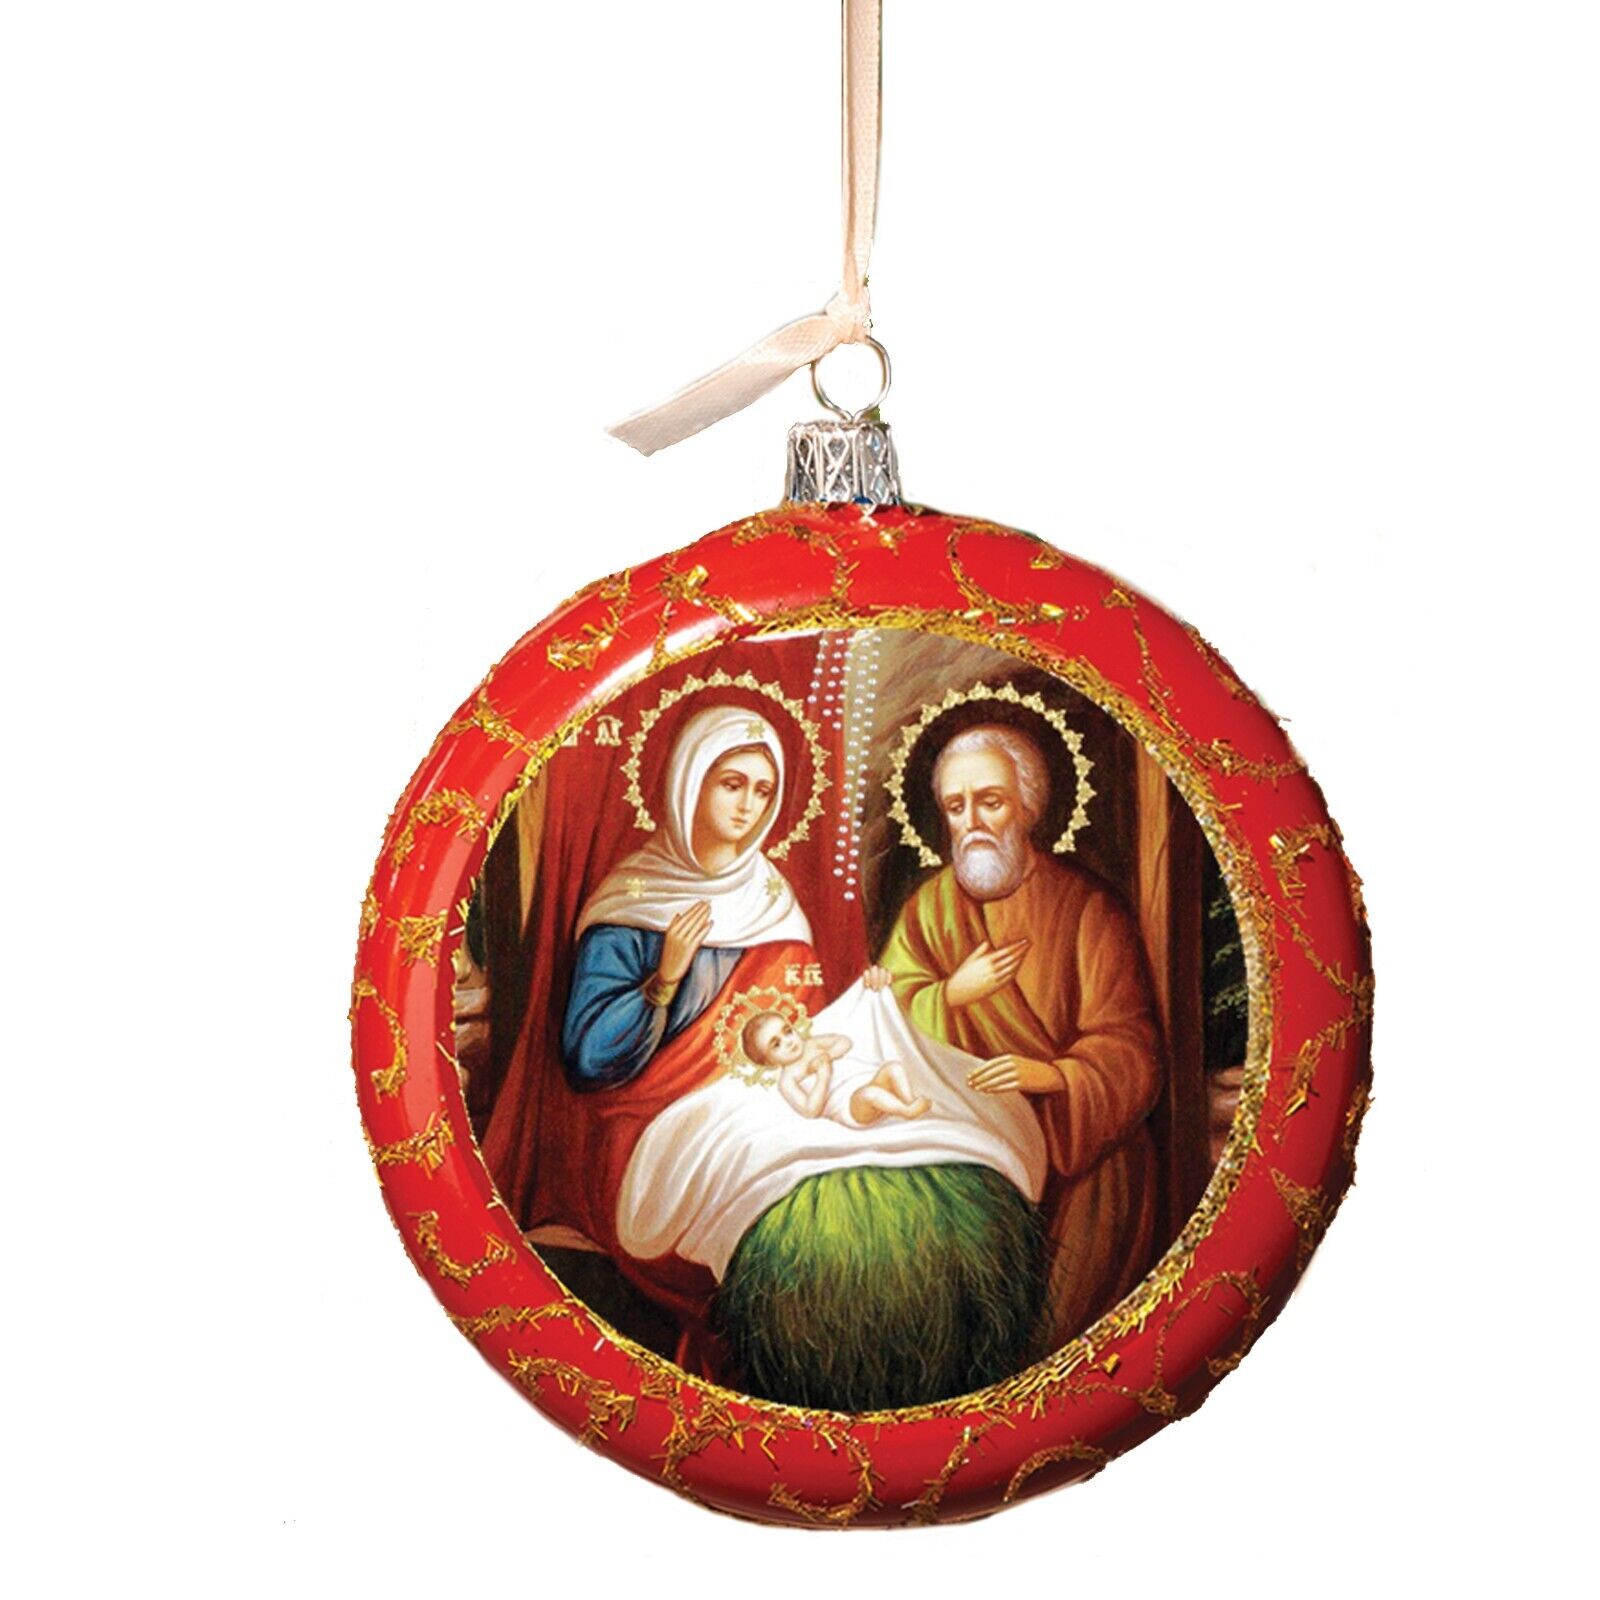 Nativity of Christ Religious Round Christmas Icon Ornament Gift Decoration